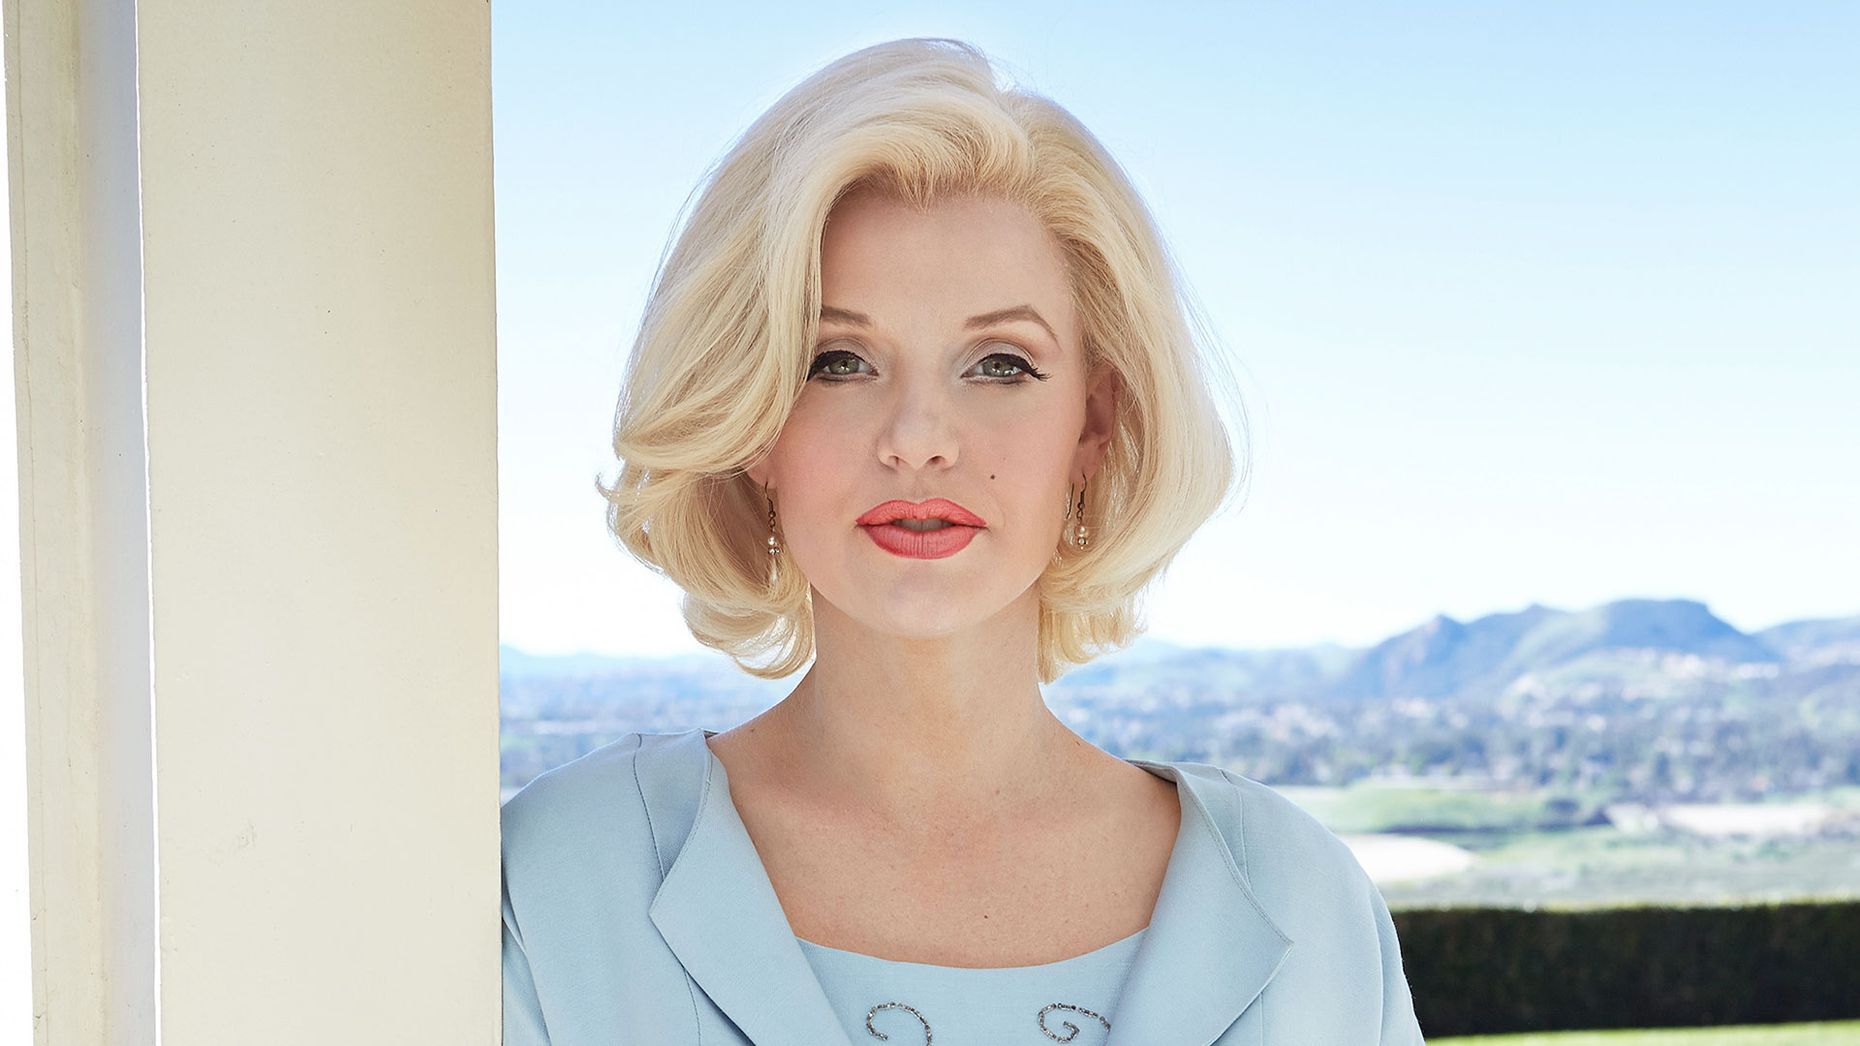 <p>Known for her role in the series <em>Pan Am</em>, Kelli Garner brings Marilyn Monroe to life on the small screen in this miniseries based on the book of the same name by J. Randy Taraborrelli. The show focuses as much on the beautiful blonde as on the women around her, particularly her mother, played by Susan Sarandon. In addition to being the spitting image of the famous Hollywood icon, Kelli Garner <a href="https://variety.com/2015/tv/reviews/the-secret-life-of-marilyn-monroe-miniseries-review-kelli-garner-susan-sarandon-lifetime-1201501978/" class="atom_link atom_valid" rel="noreferrer noopener">replicates her mannerisms to perfection</a>. It’s a true pleasure to watch her performance.</p>